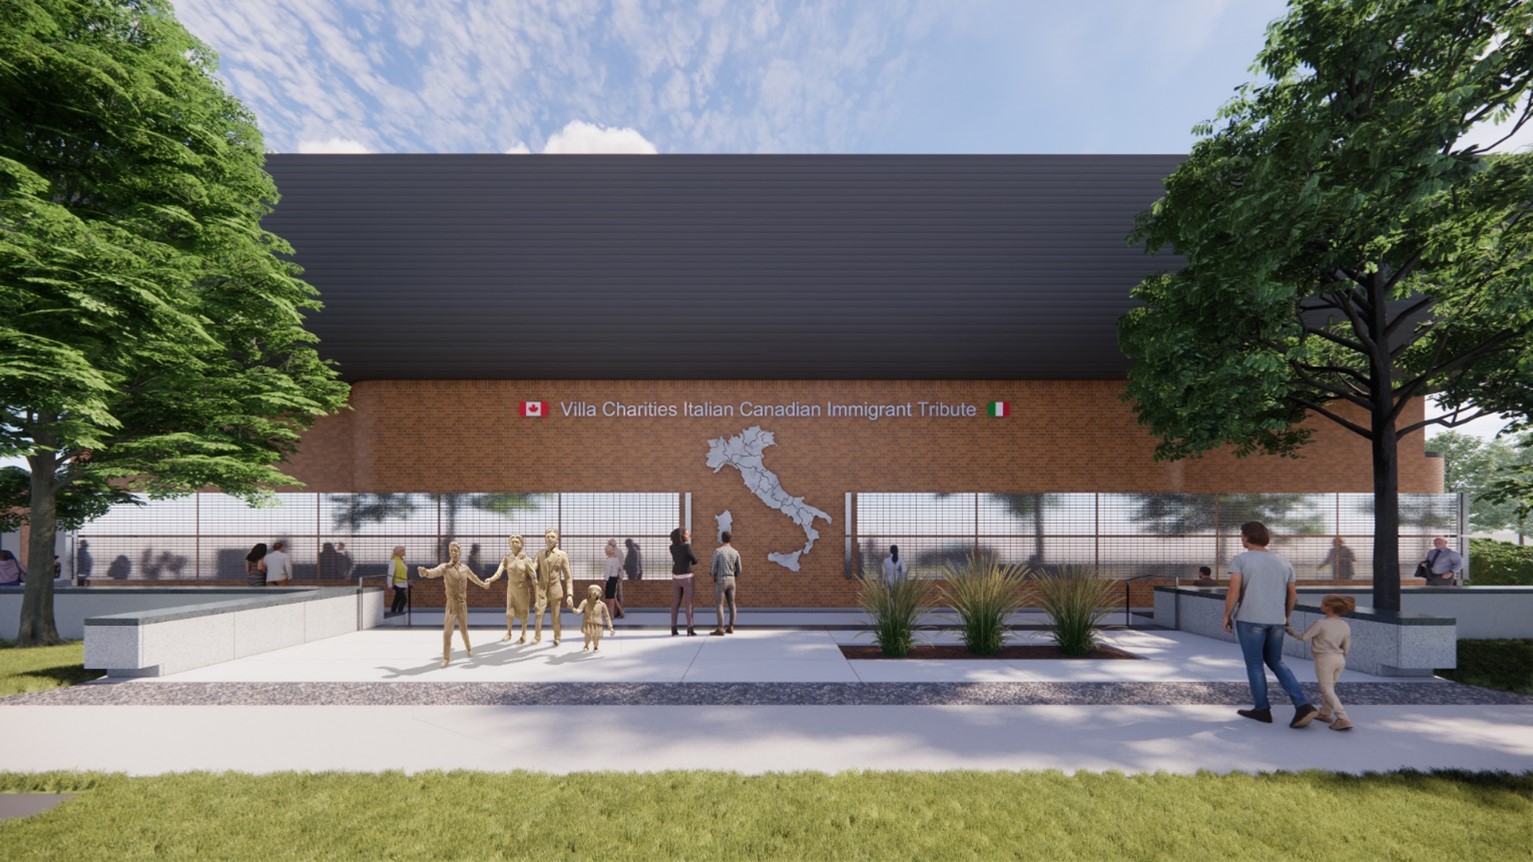 Villa Charities Italian Canadian Immigrant Tribute at the Columbus Centre | Rendering by Brown + Storey Architects Inc. The installation is set to break ground in 2023. Villa Charities announced that honourary plaques are available to purchase beginning today.